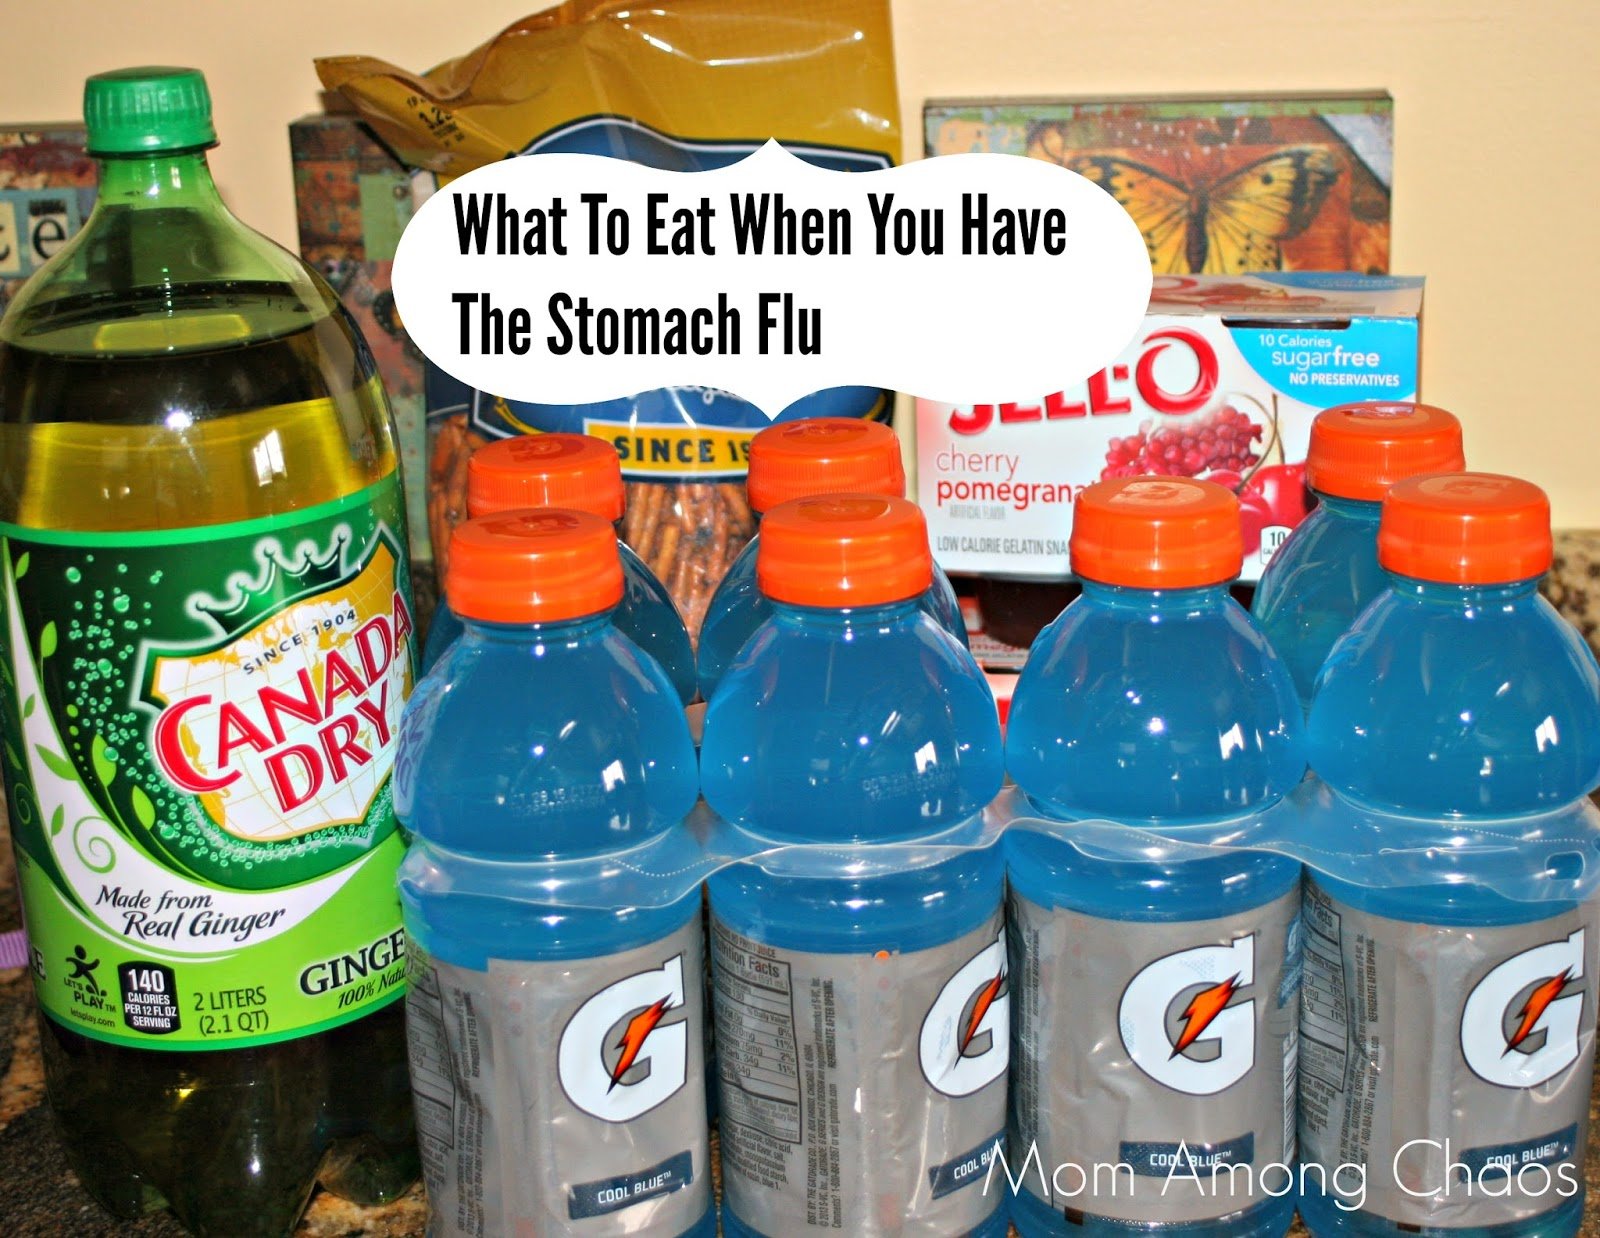 Mom Among Chaos: What to Eat When You Have the Stomach Flu